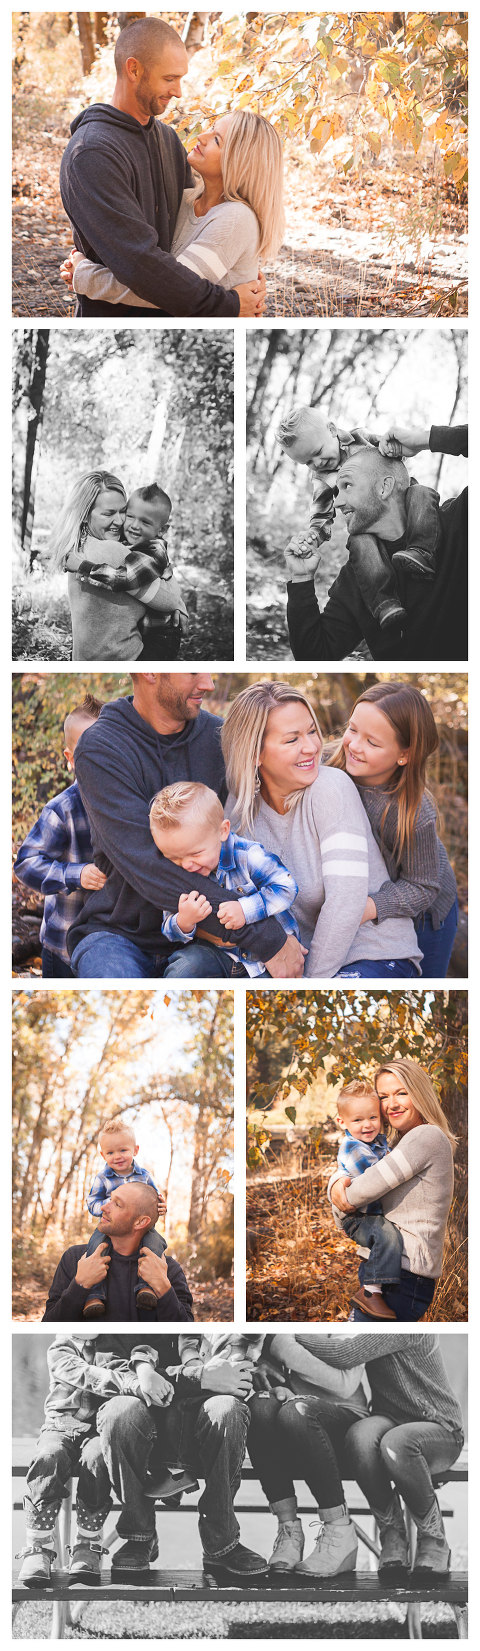 Anderson Family, Lifestyle session captured by Hailey Haberman, Ellensburg, WA